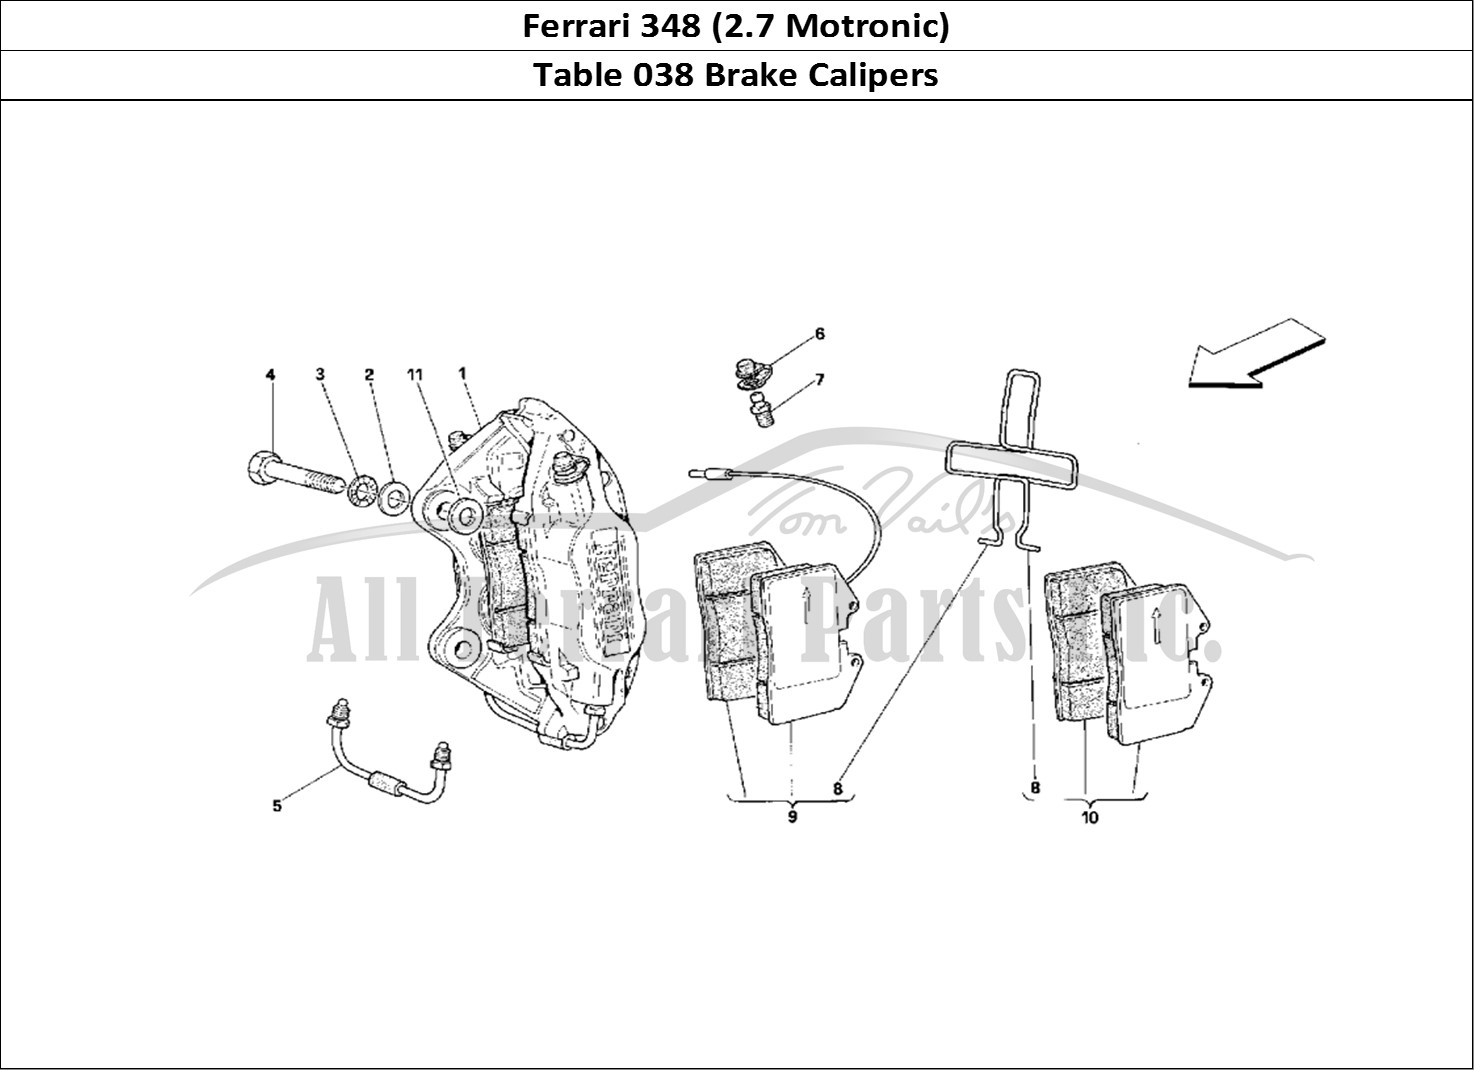 Ferrari Parts Ferrari 348 (2.7 Motronic) Page 038 Calipers for Front and Re